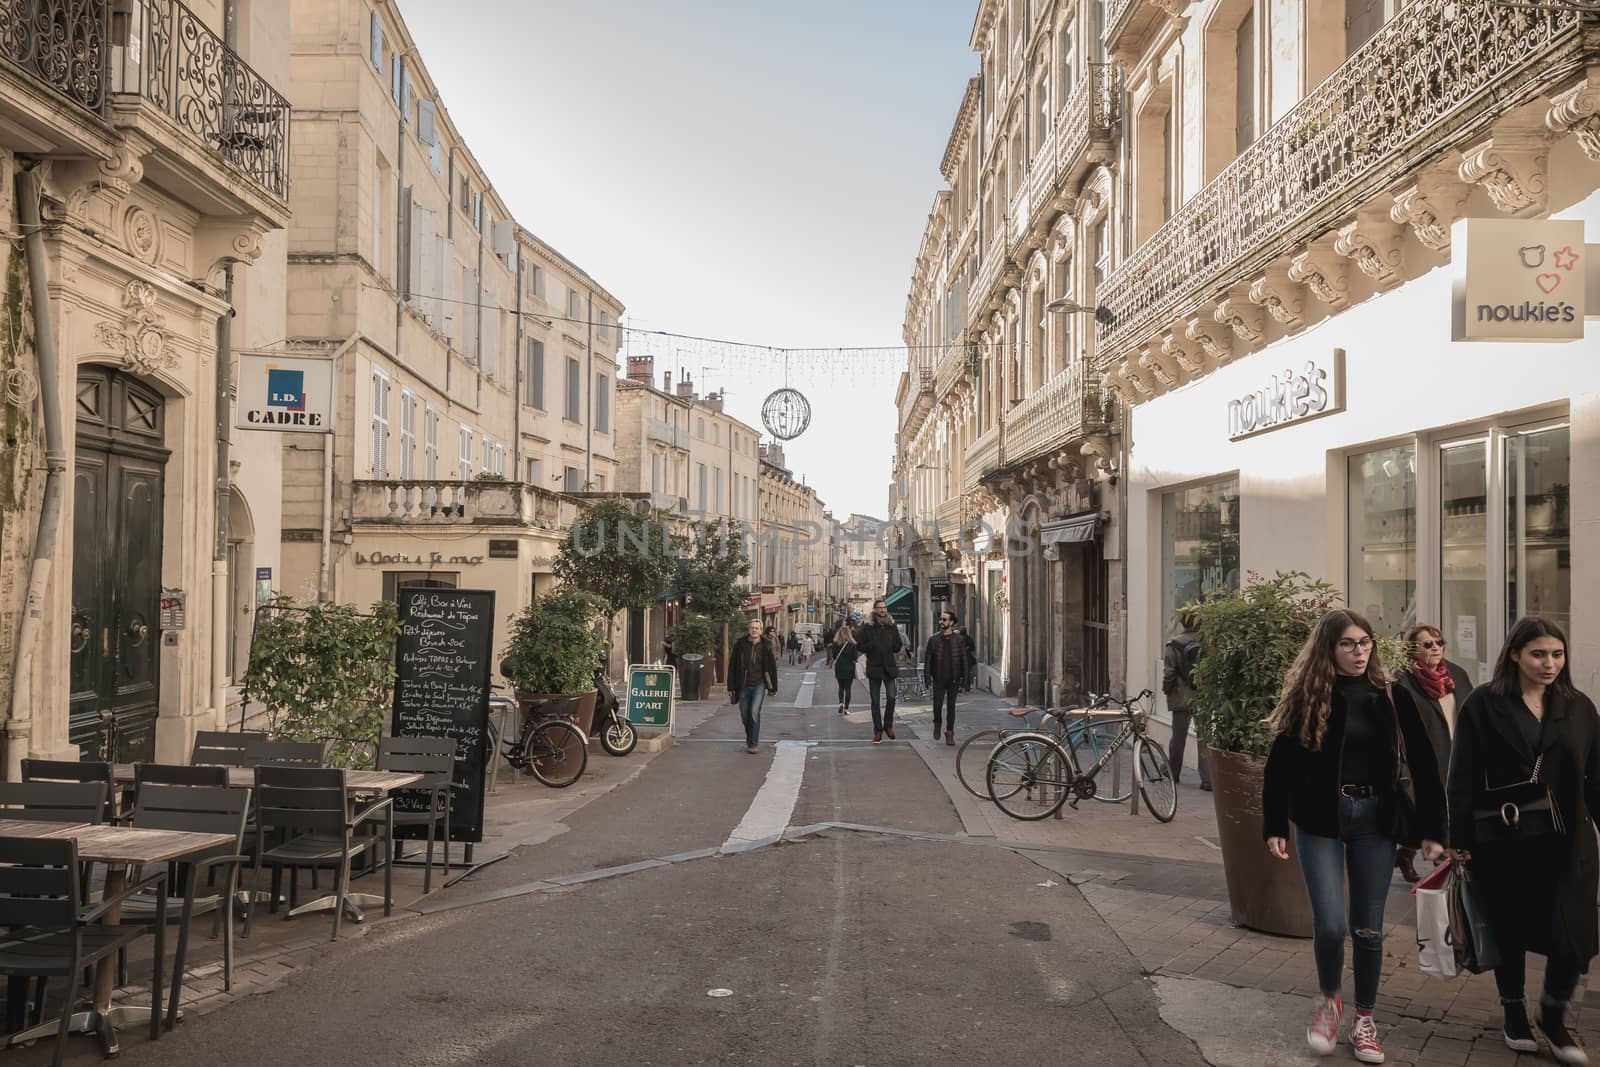 Montpellier, France - January 2, 2019: Street atmosphere and architecture in a shopping street in the historic city center where people walk on a winter day